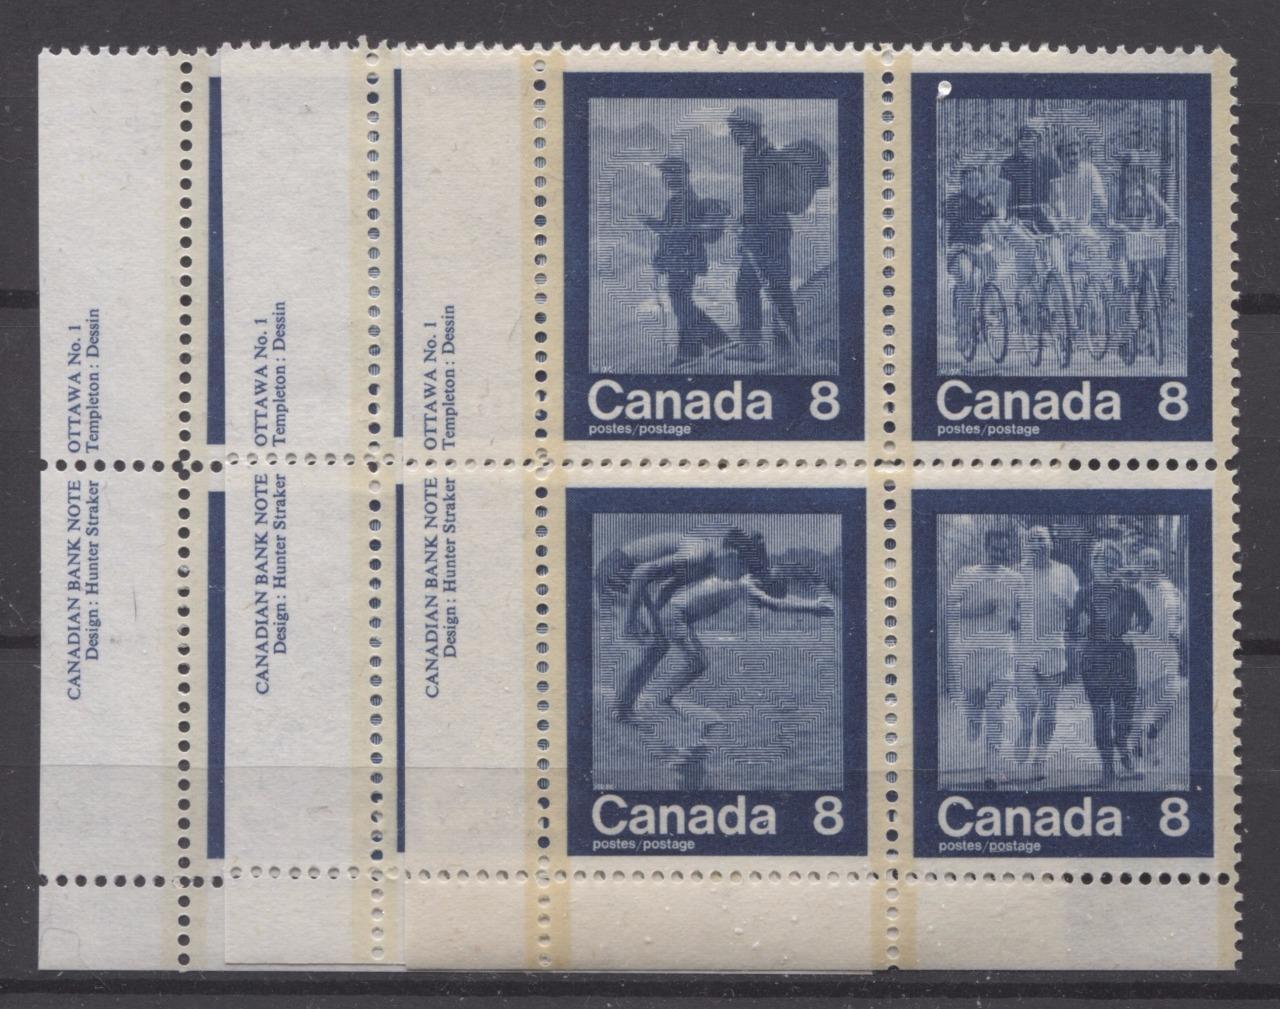 Canada #632i (SG#771) 1974 Summer Sports Issue "Hiking" Paper/Tag Type 3 Plate 1 LR VF-80 NH Brixton Chrome 